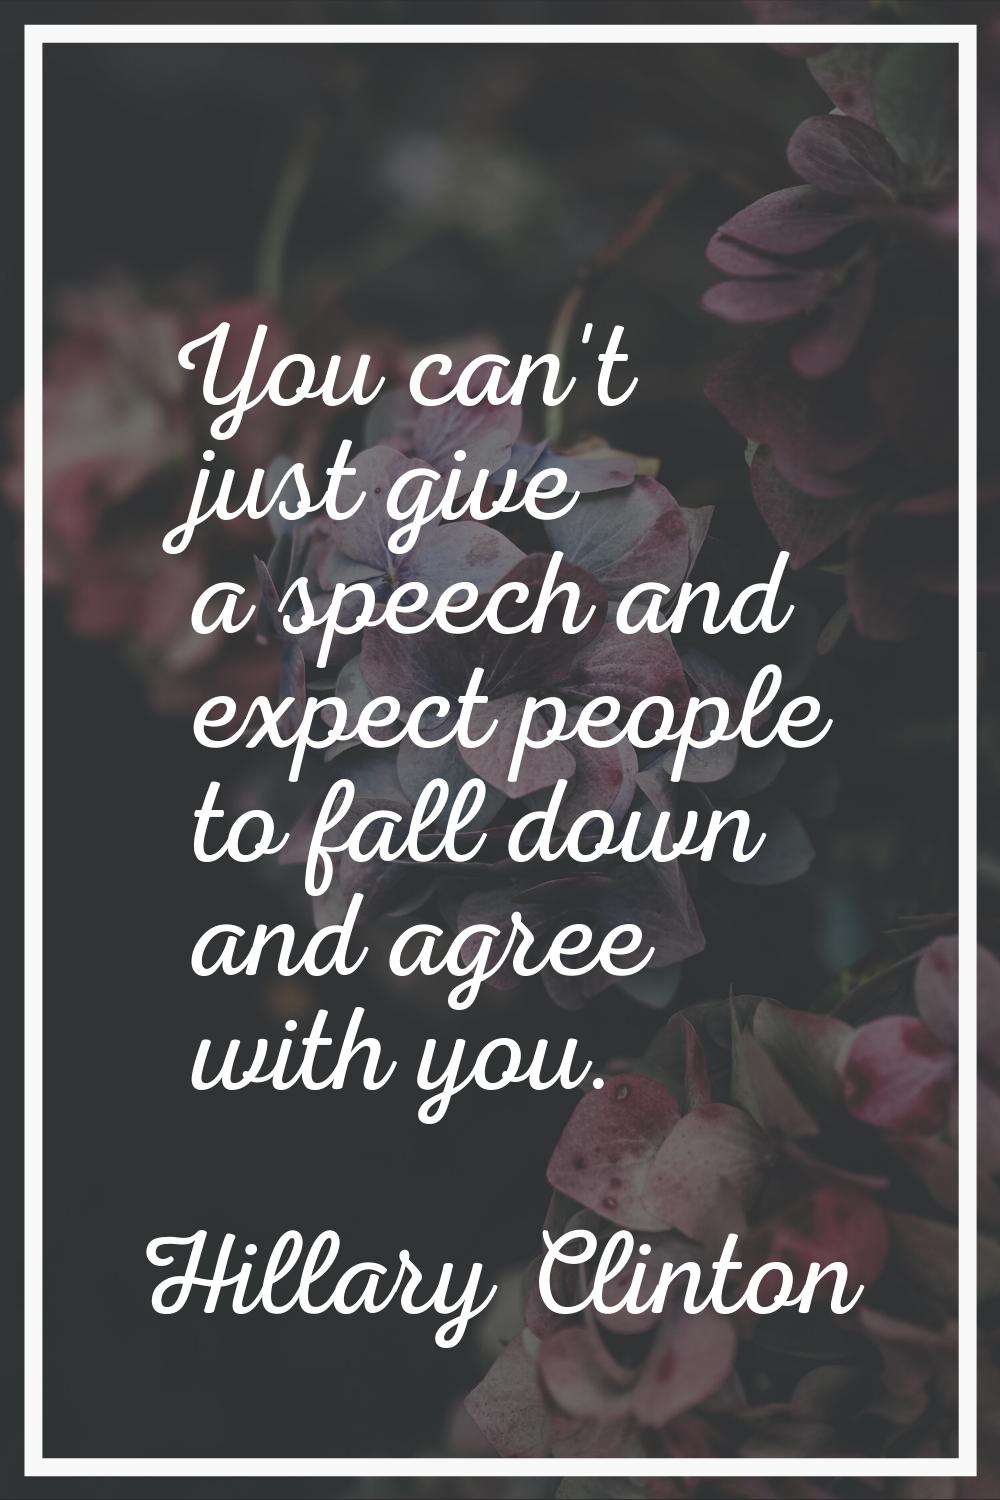 You can't just give a speech and expect people to fall down and agree with you.